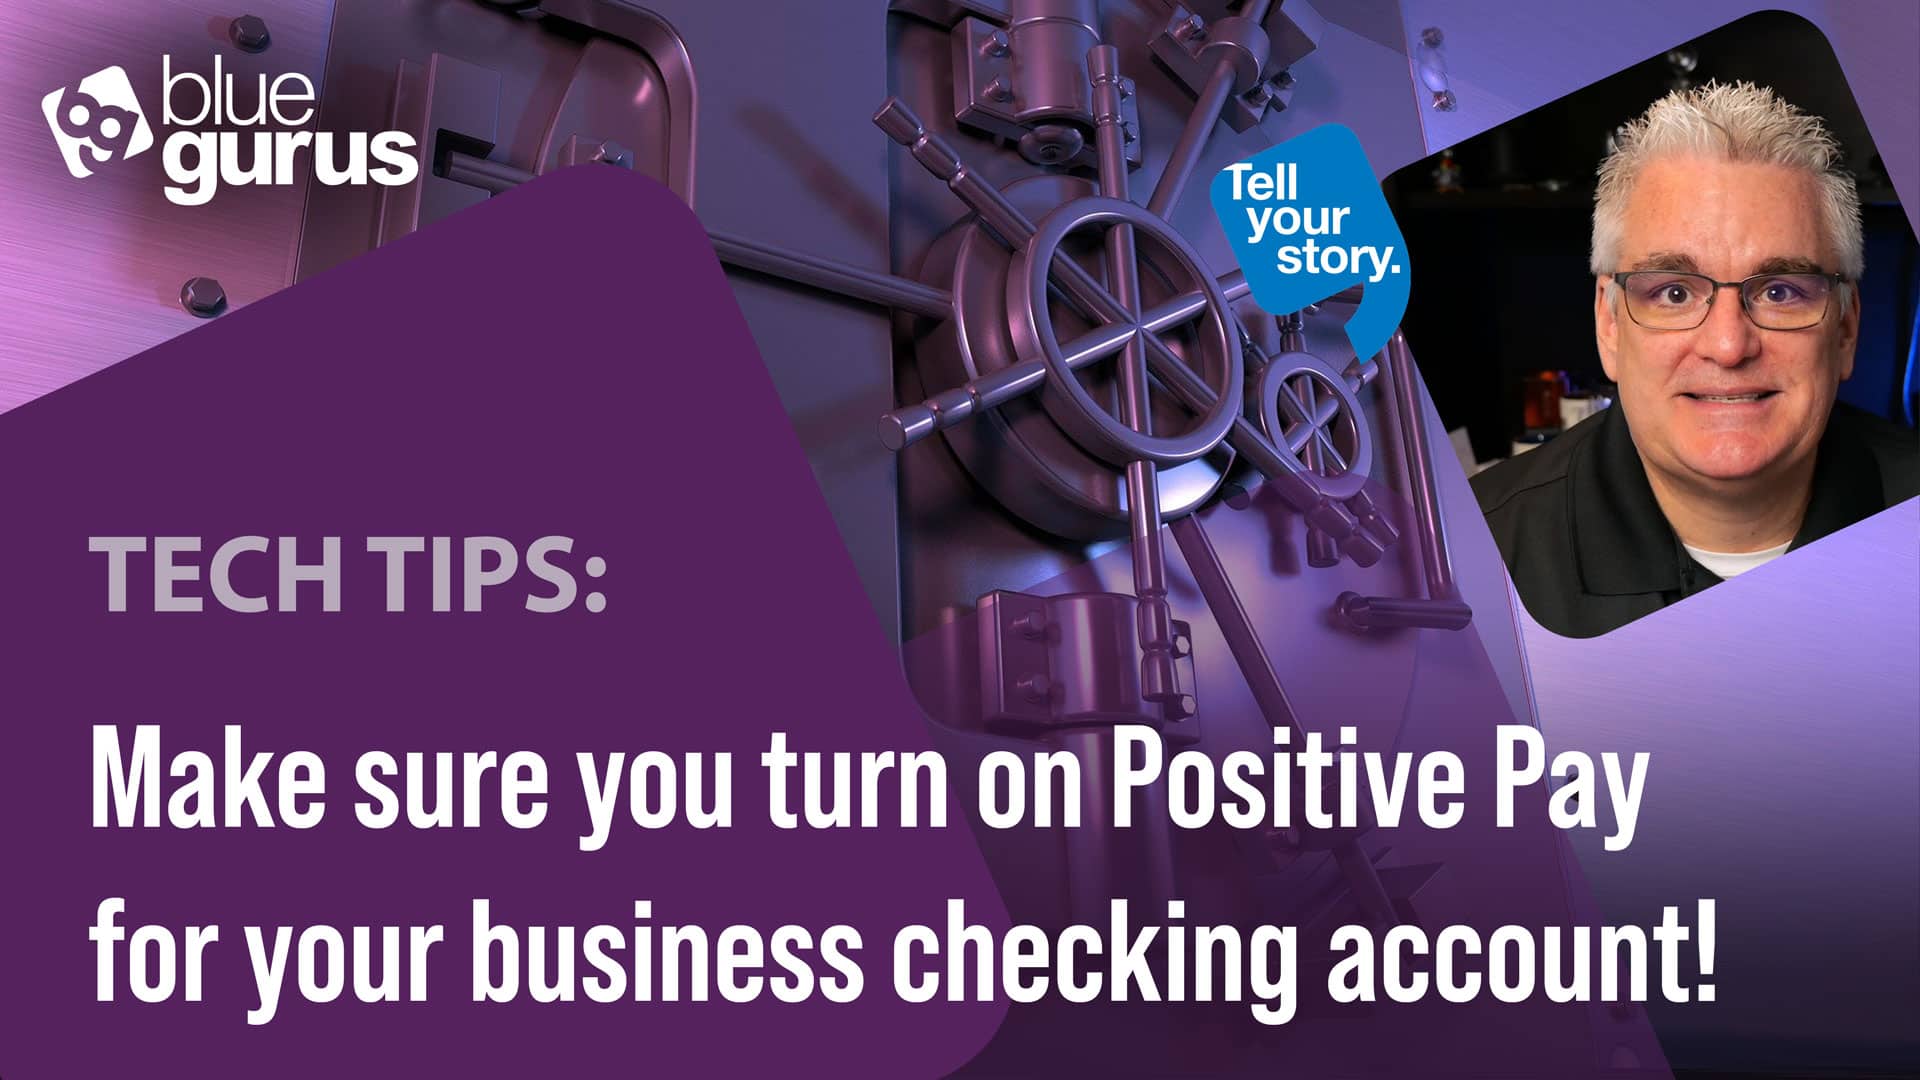 Make sure you turn on Positive Pay for your business checking account!